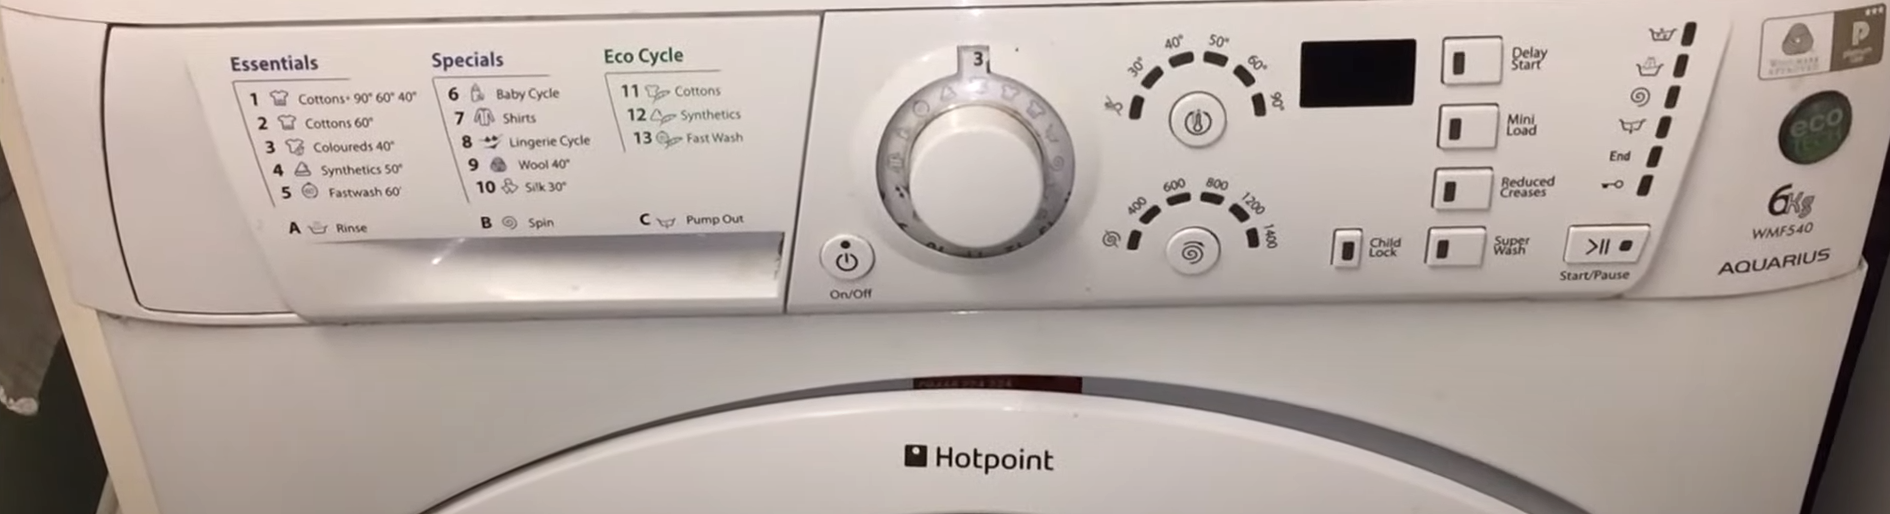 Hotpoint Washing Machine with the control panel